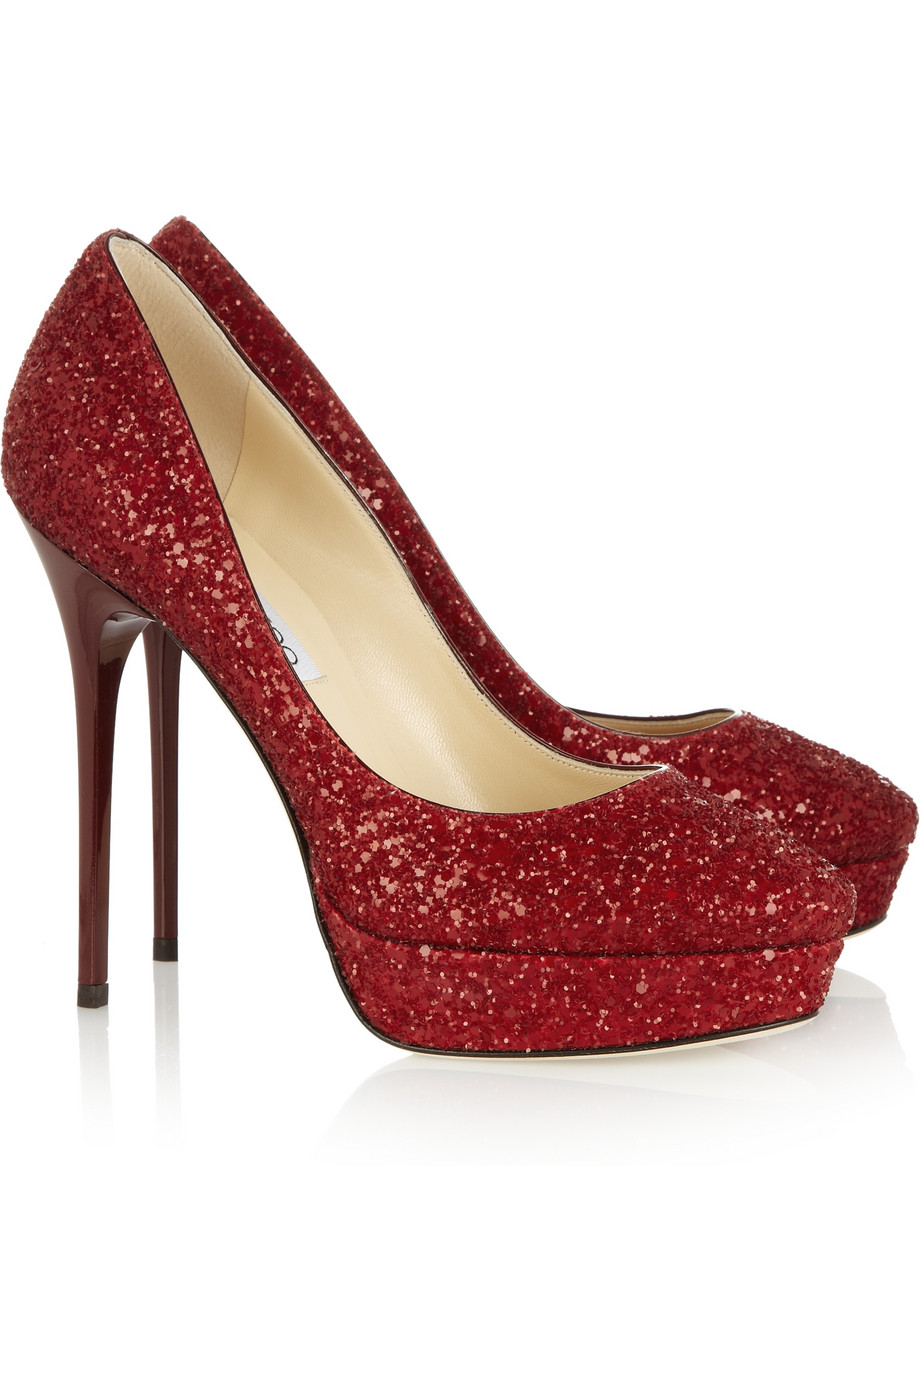 Lyst - Jimmy Choo Cosmic Glitter Finish Leather Pumps in Red